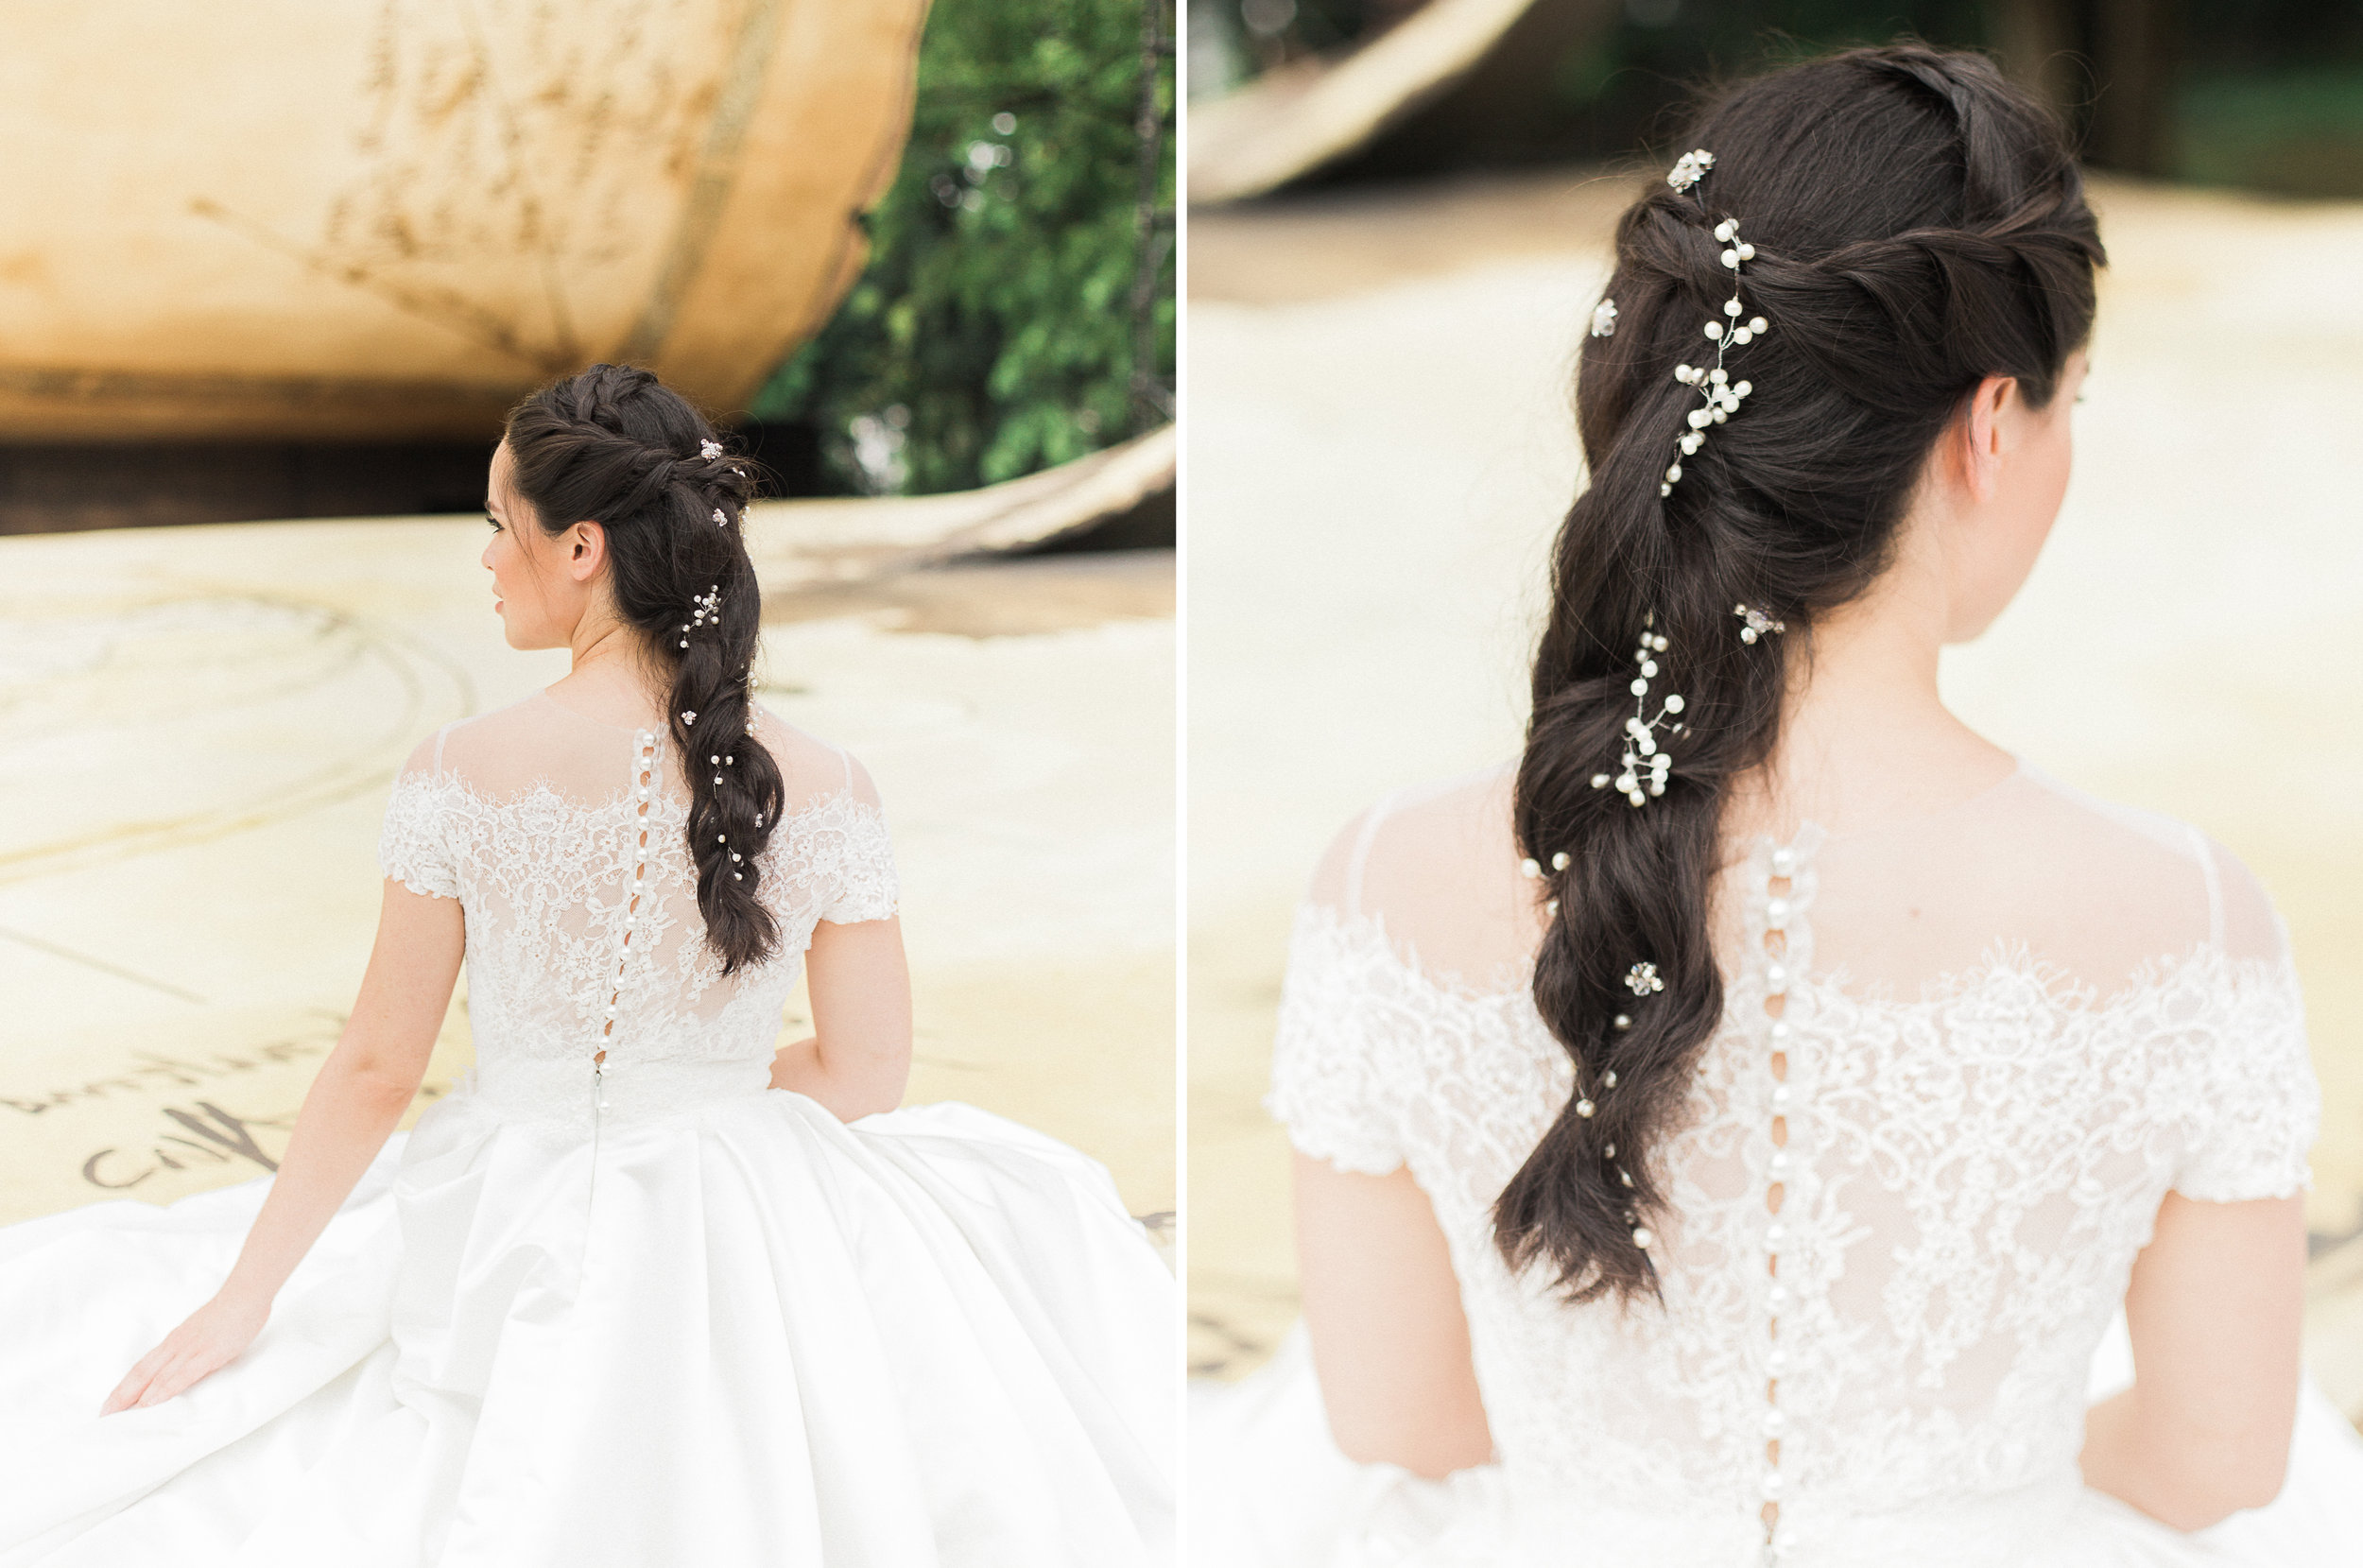 chen sands editorial bridal shoot shakespeare the wedding scoop singapore collage 7.jpg